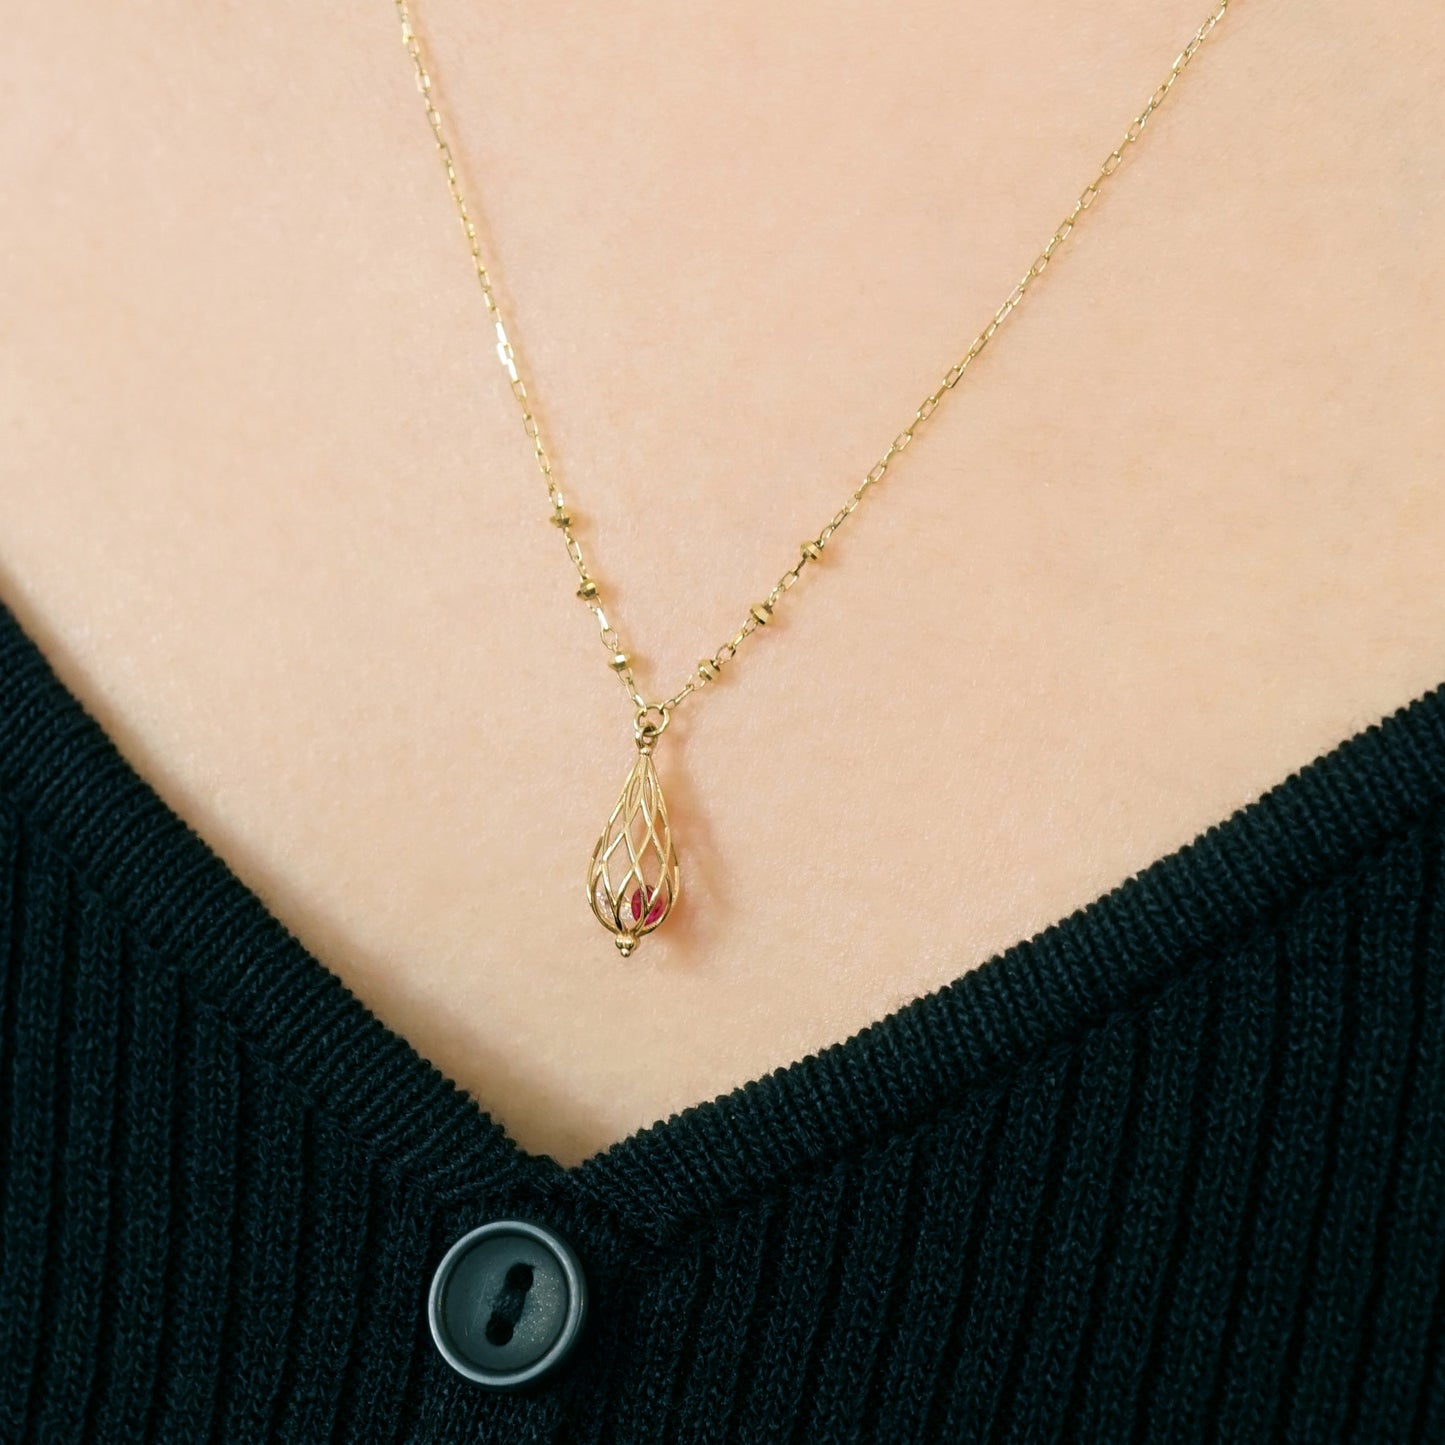 [Pannier] 10K Chandelier Necklace (Yellow Gold) - Model Image